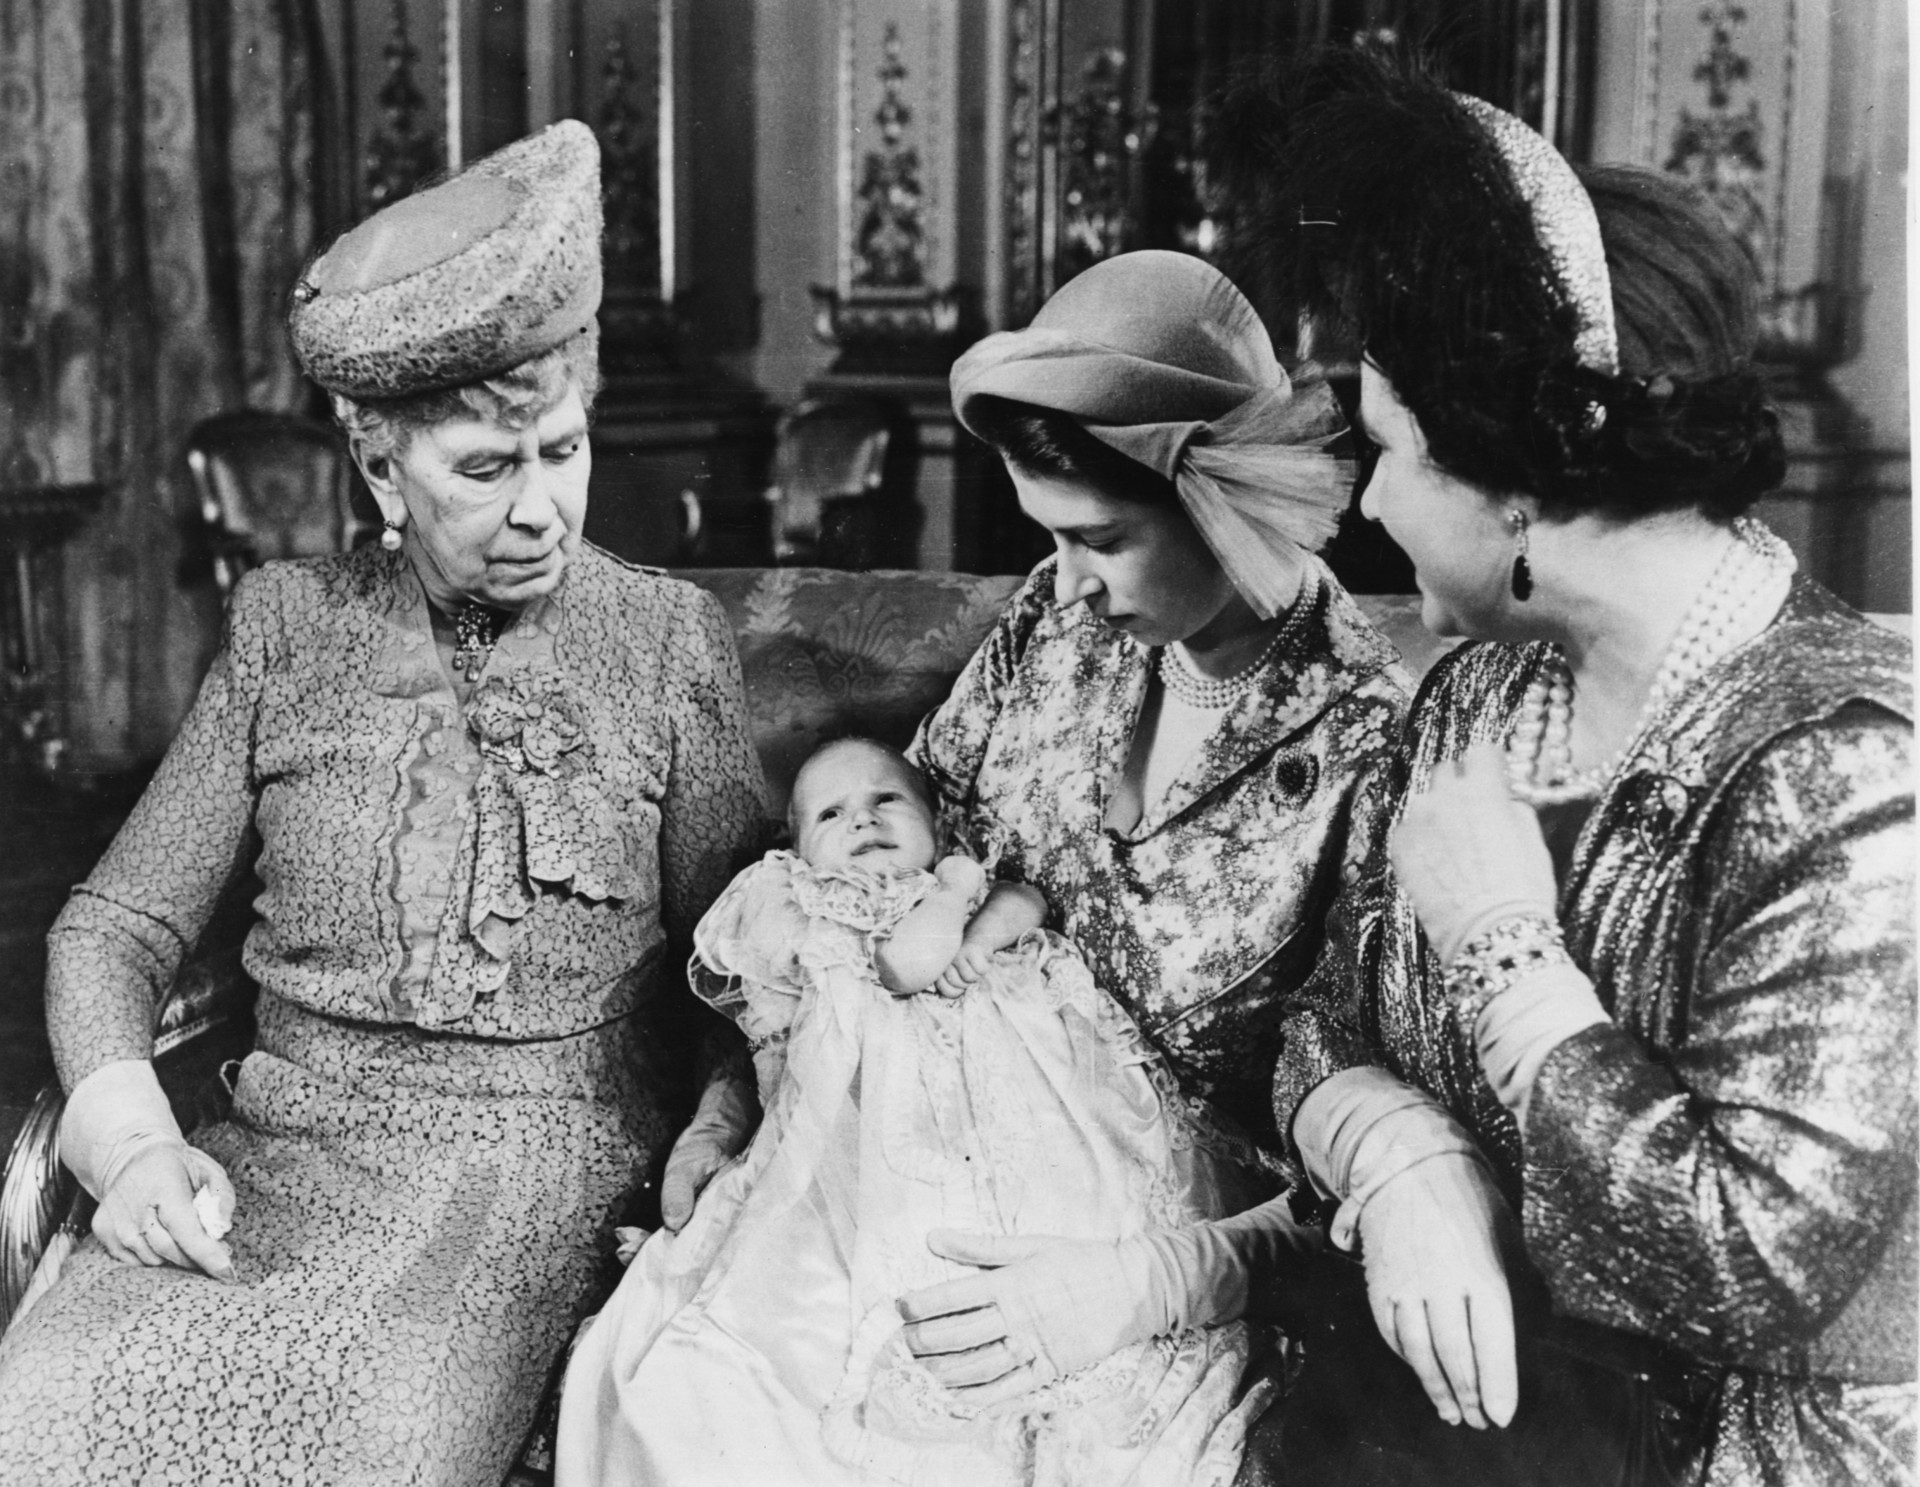 Princess Elizabeth holds her baby daughter Princess Anne after her christening. Queen Elizabeth and Queen Mary look on proudly.<p><a href="https://www.msn.com/en-au/community/channel/vid-7xx8mnucu55yw63we9va2gwr7uihbxwc68fxqp25x6tg4ftibpra?cvid=94631541bc0f4f89bfd59158d696ad7e">Follow us and access great exclusive content every day</a></p>